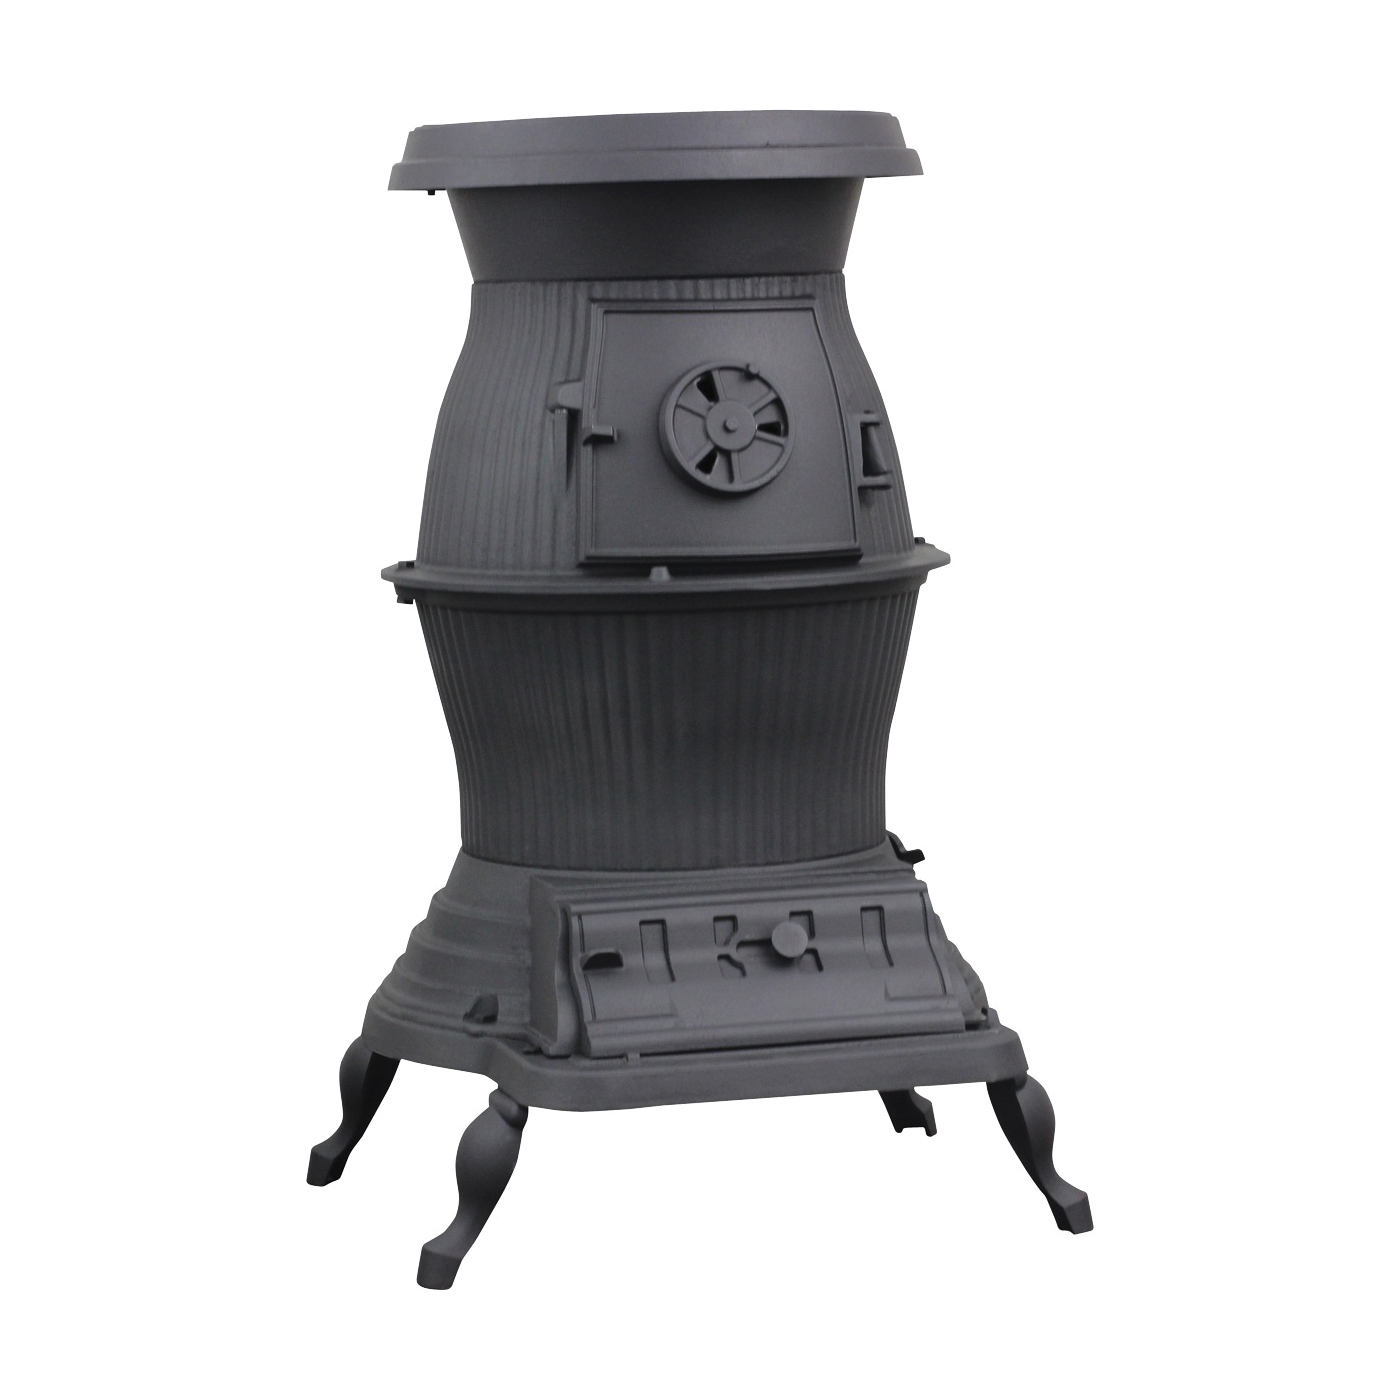 us-stove-1869pb65xl-railroad-potbelly-stove-29-in-w-22-14-in-d-32-12-in-h-75000-btu-heating-cast-iron